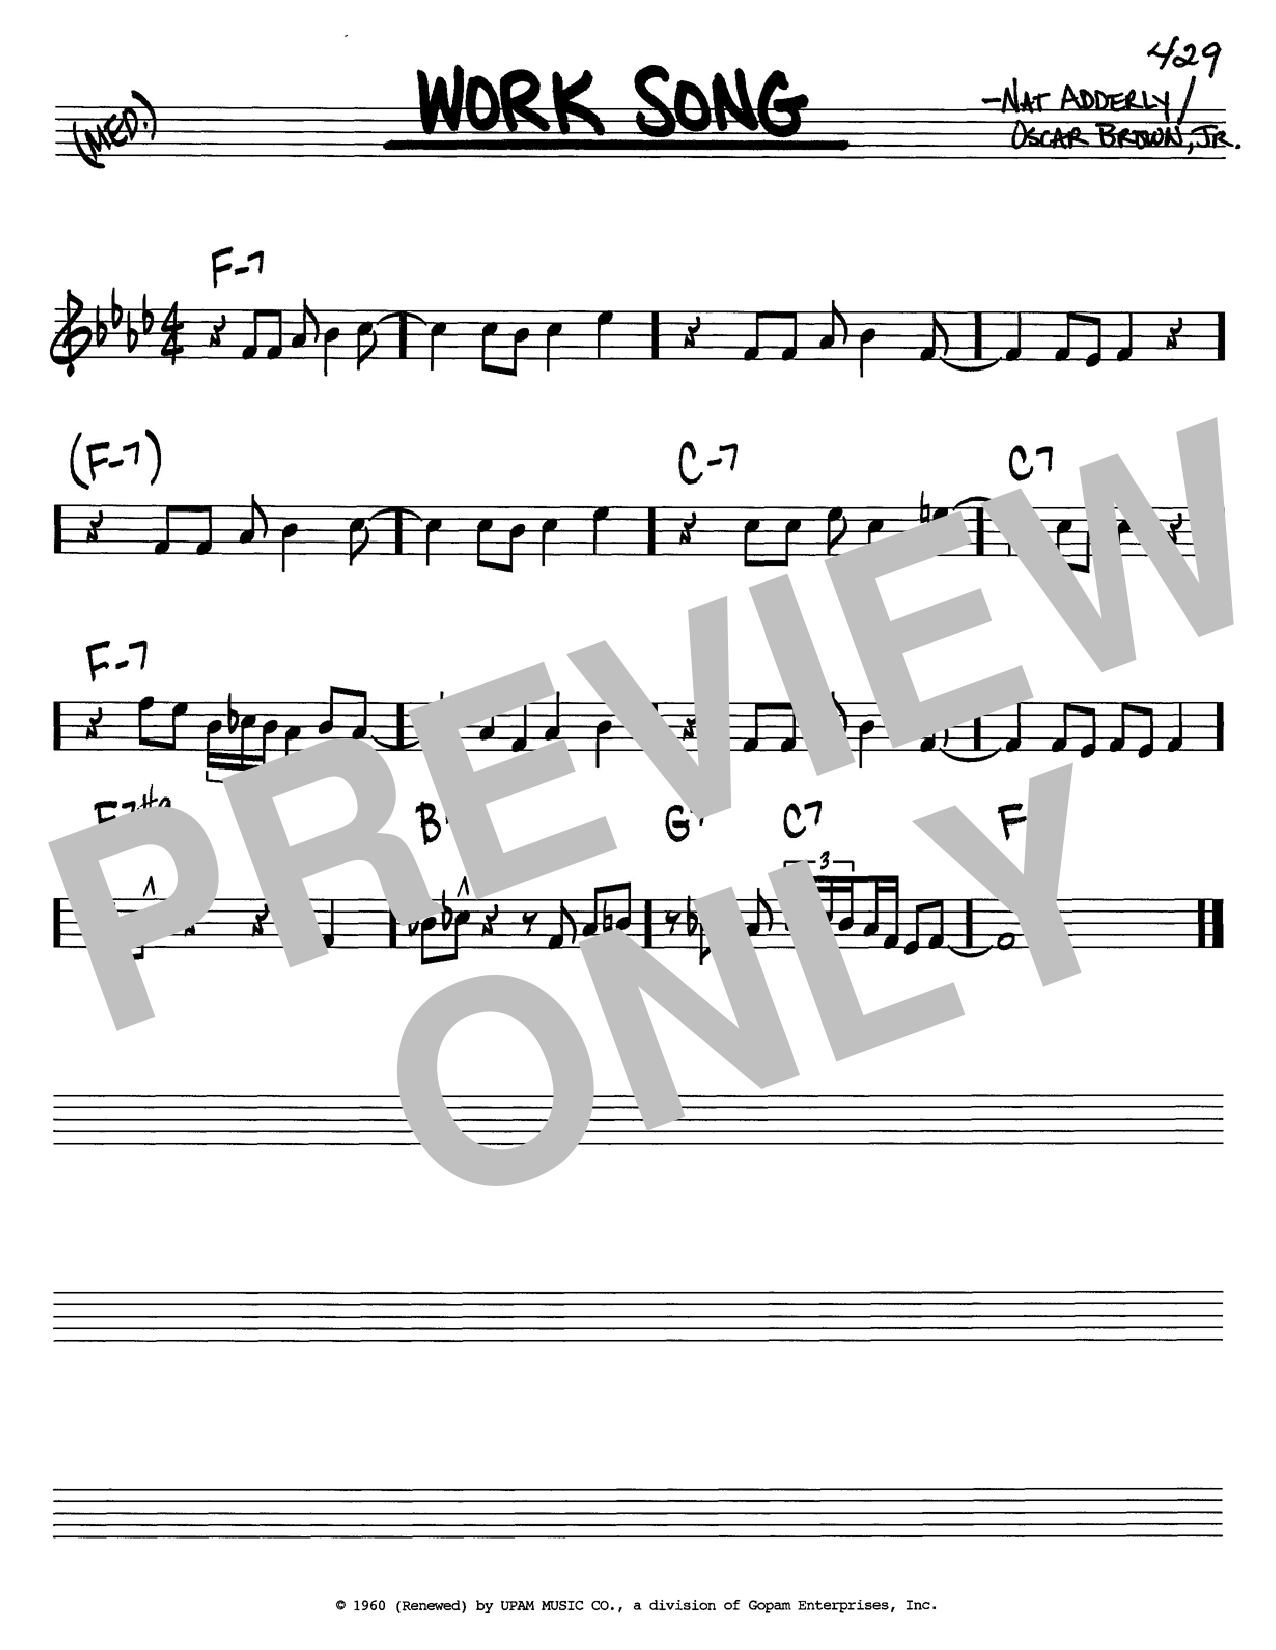 Cannonball Adderley Work Song sheet music notes and chords. Download Printable PDF.